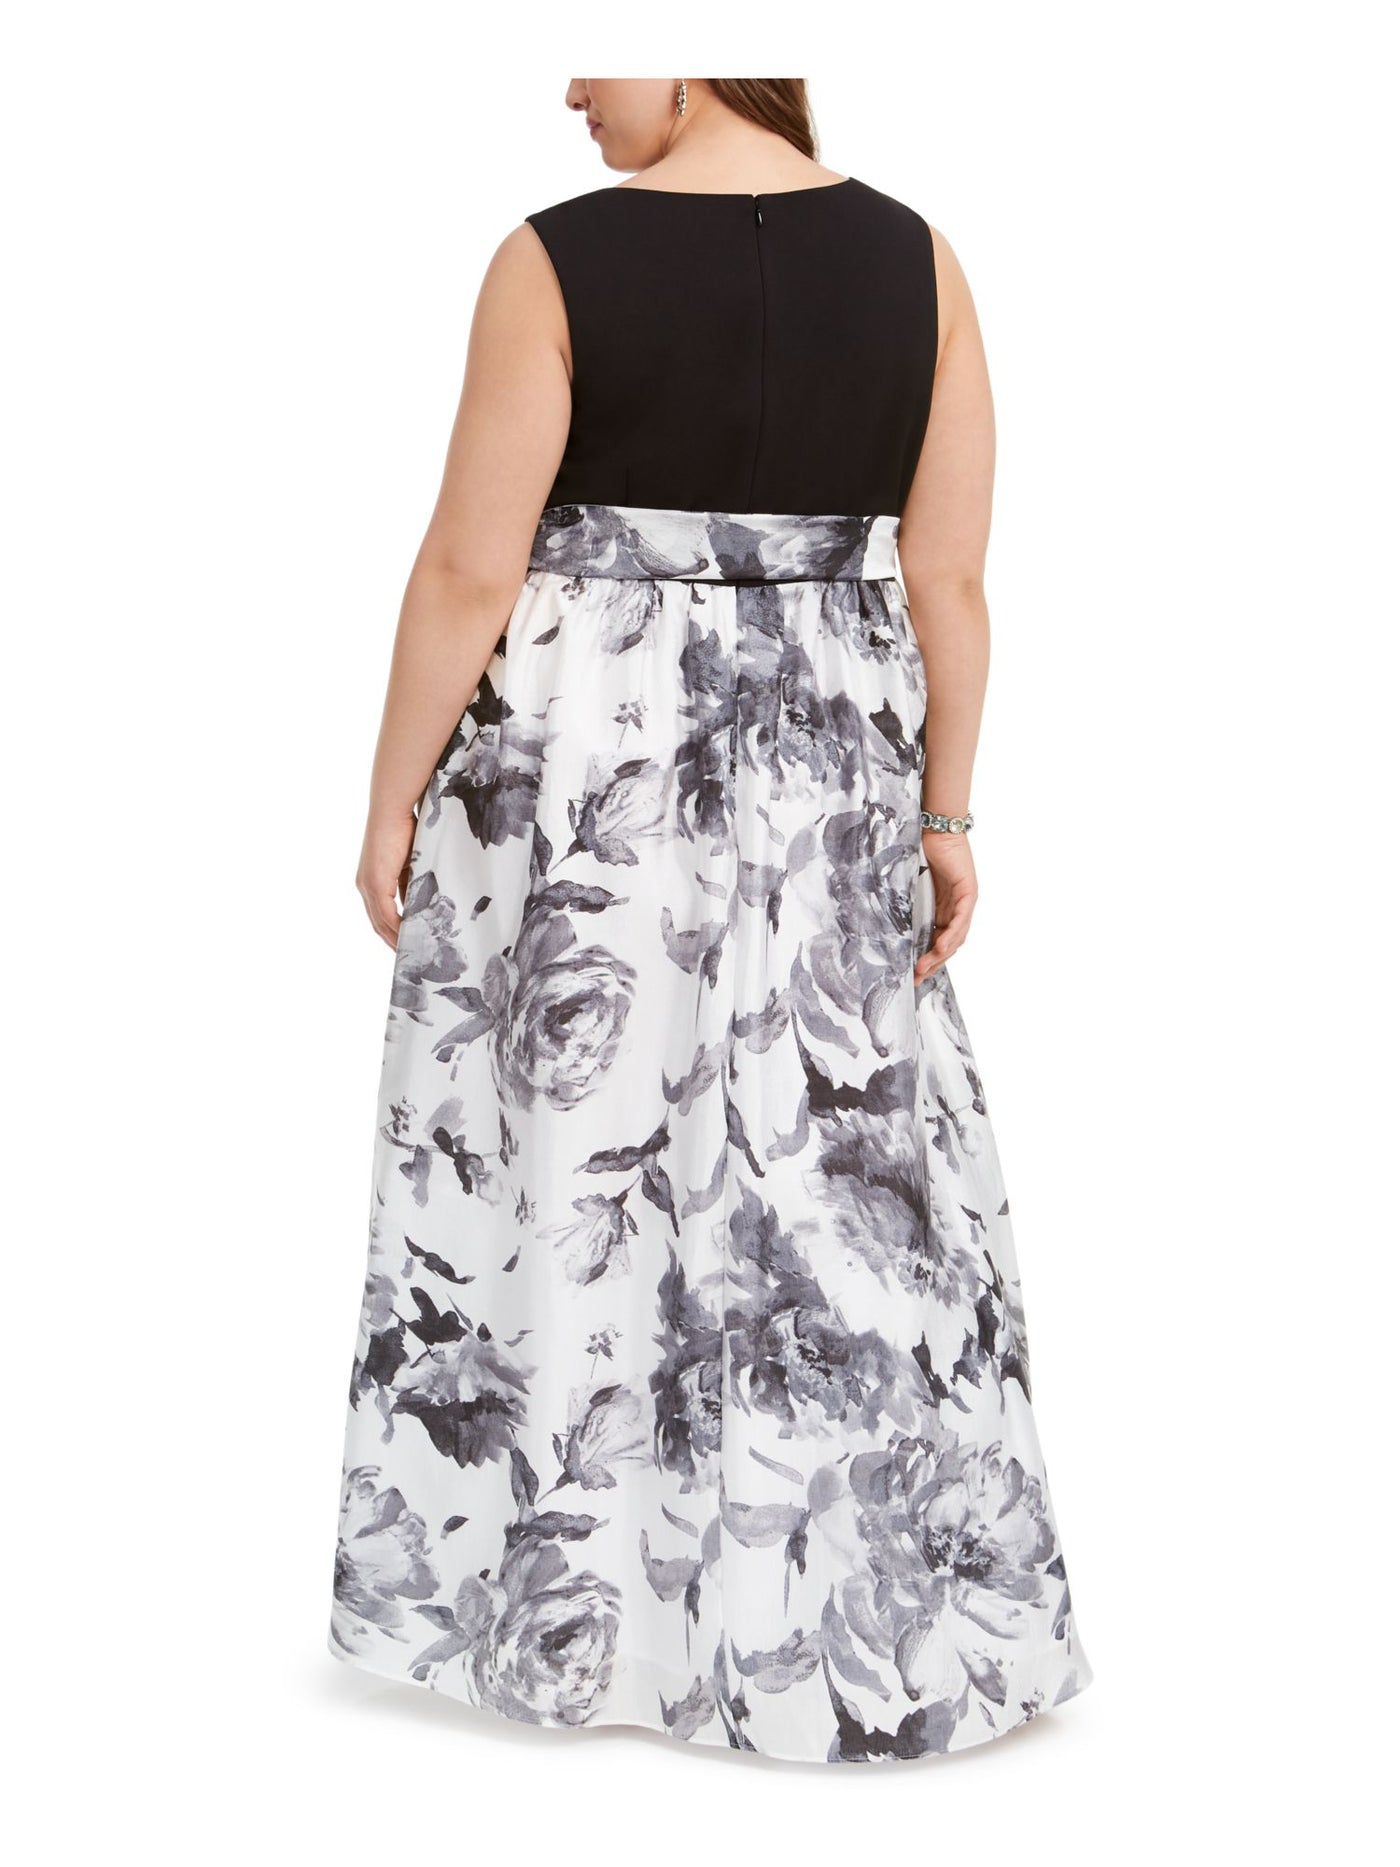 R&M RICHARDS Womens Black Belted Floral Sleeveless Full-Length Formal Fit + Flare Dress Plus 16W